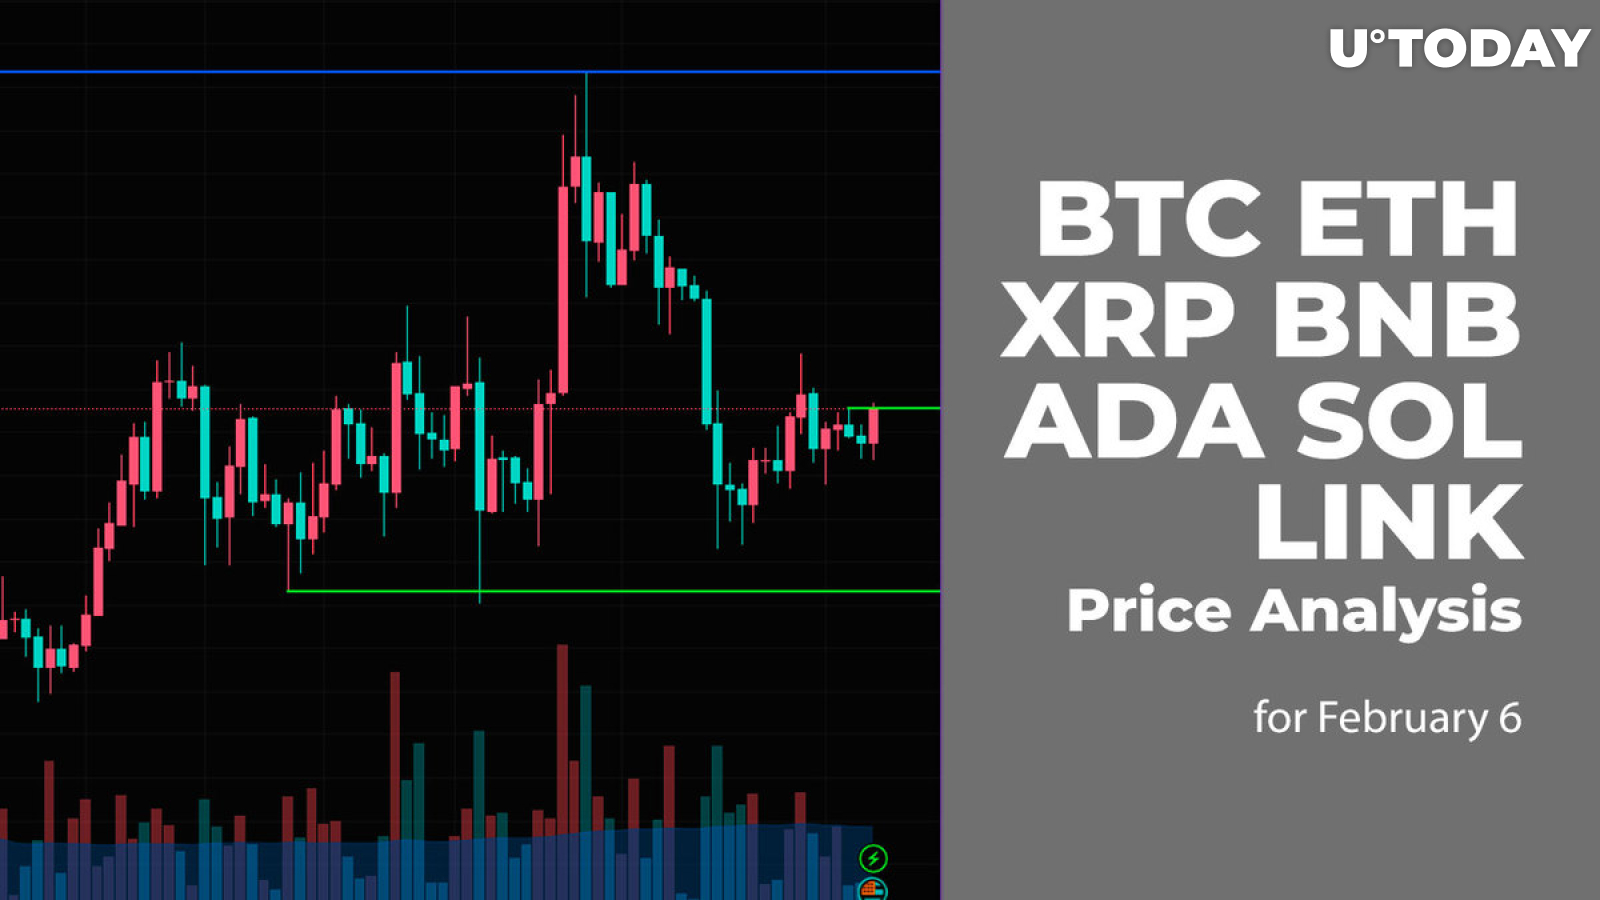 BTC, ETH, XRP, BNB, ADA, SOL and LINK Price Analysis for February 6